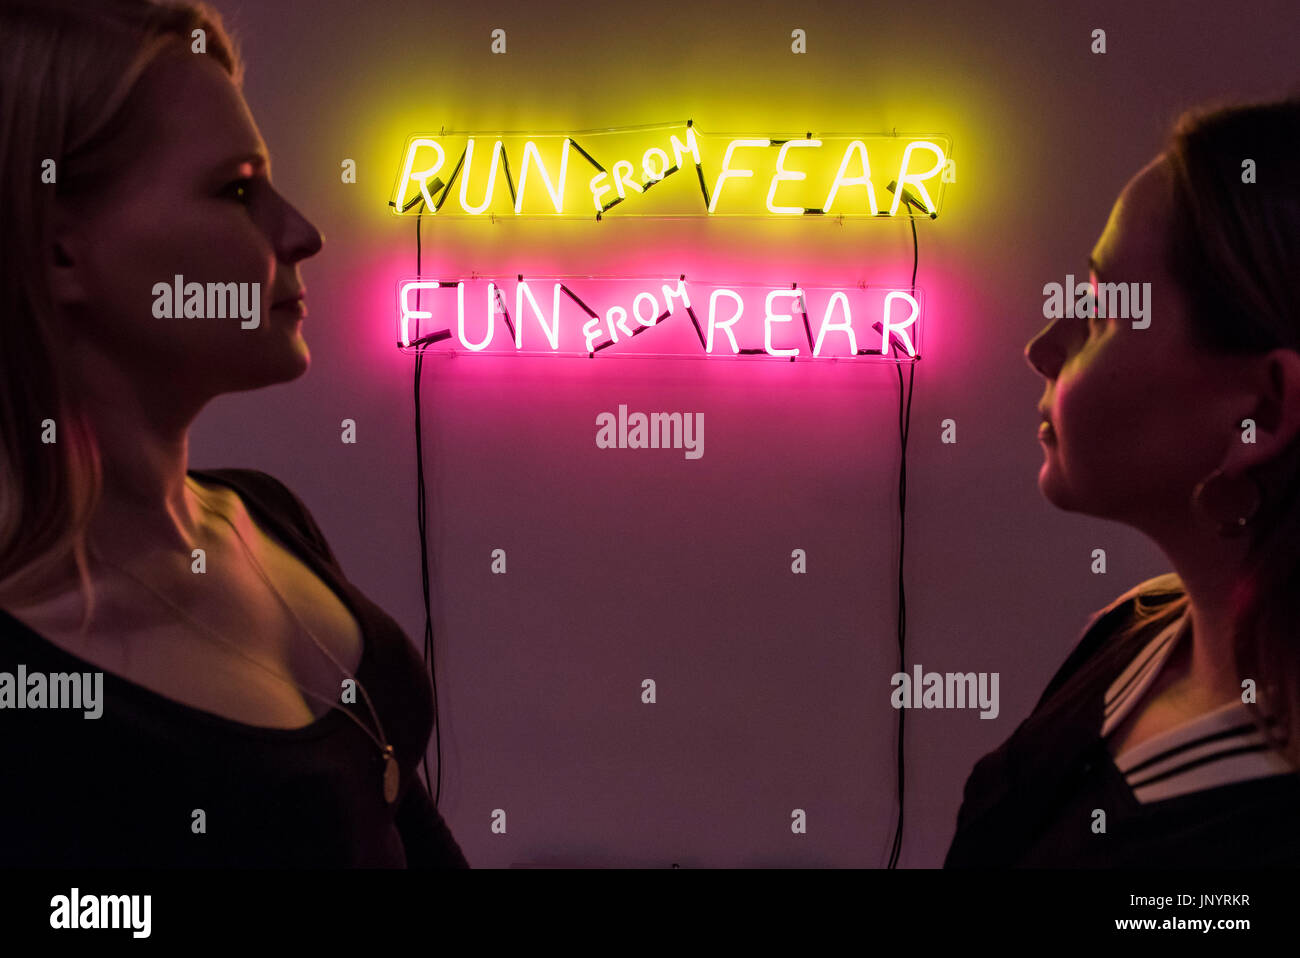 Run from Fear, Fun from Rear 1972 - works by Bruce Nauman in the ARTIST ROOMS, a new exhibition, is at Tate Modern from 24 July 2017 – July 2018. Stock Photo